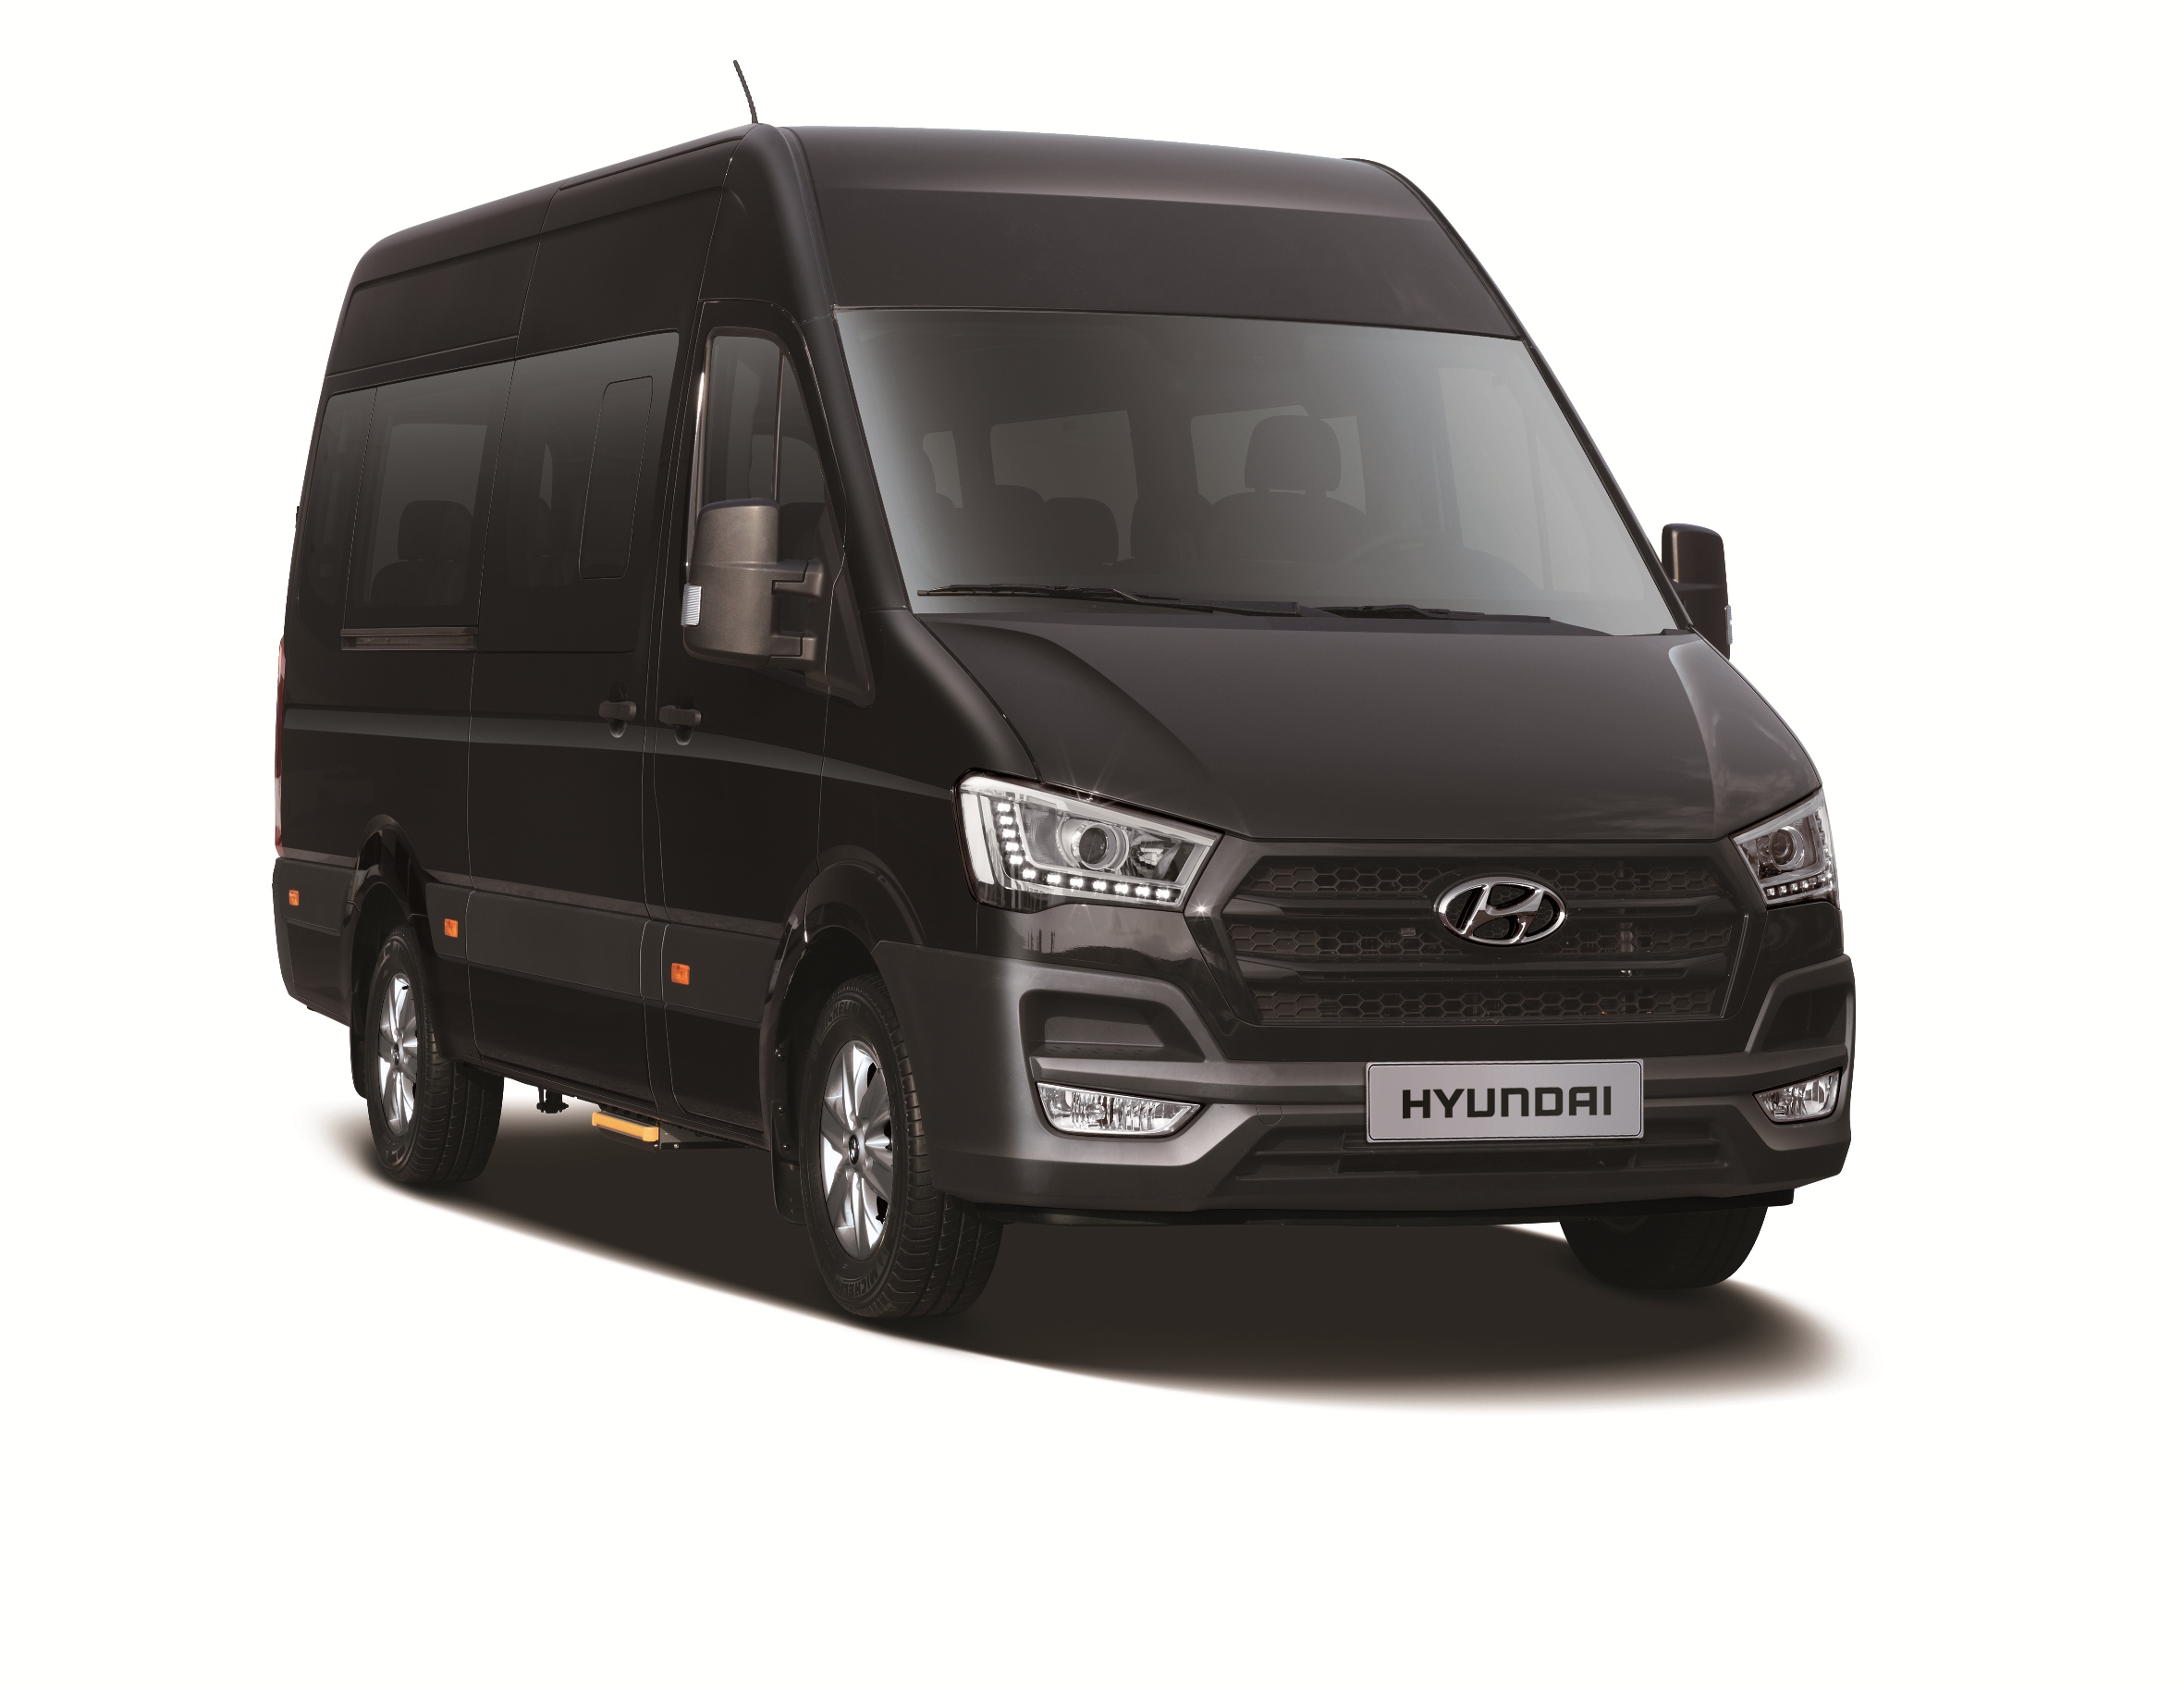 Hyundai Revealed First Official Picture & Details of H350 Commercial Van